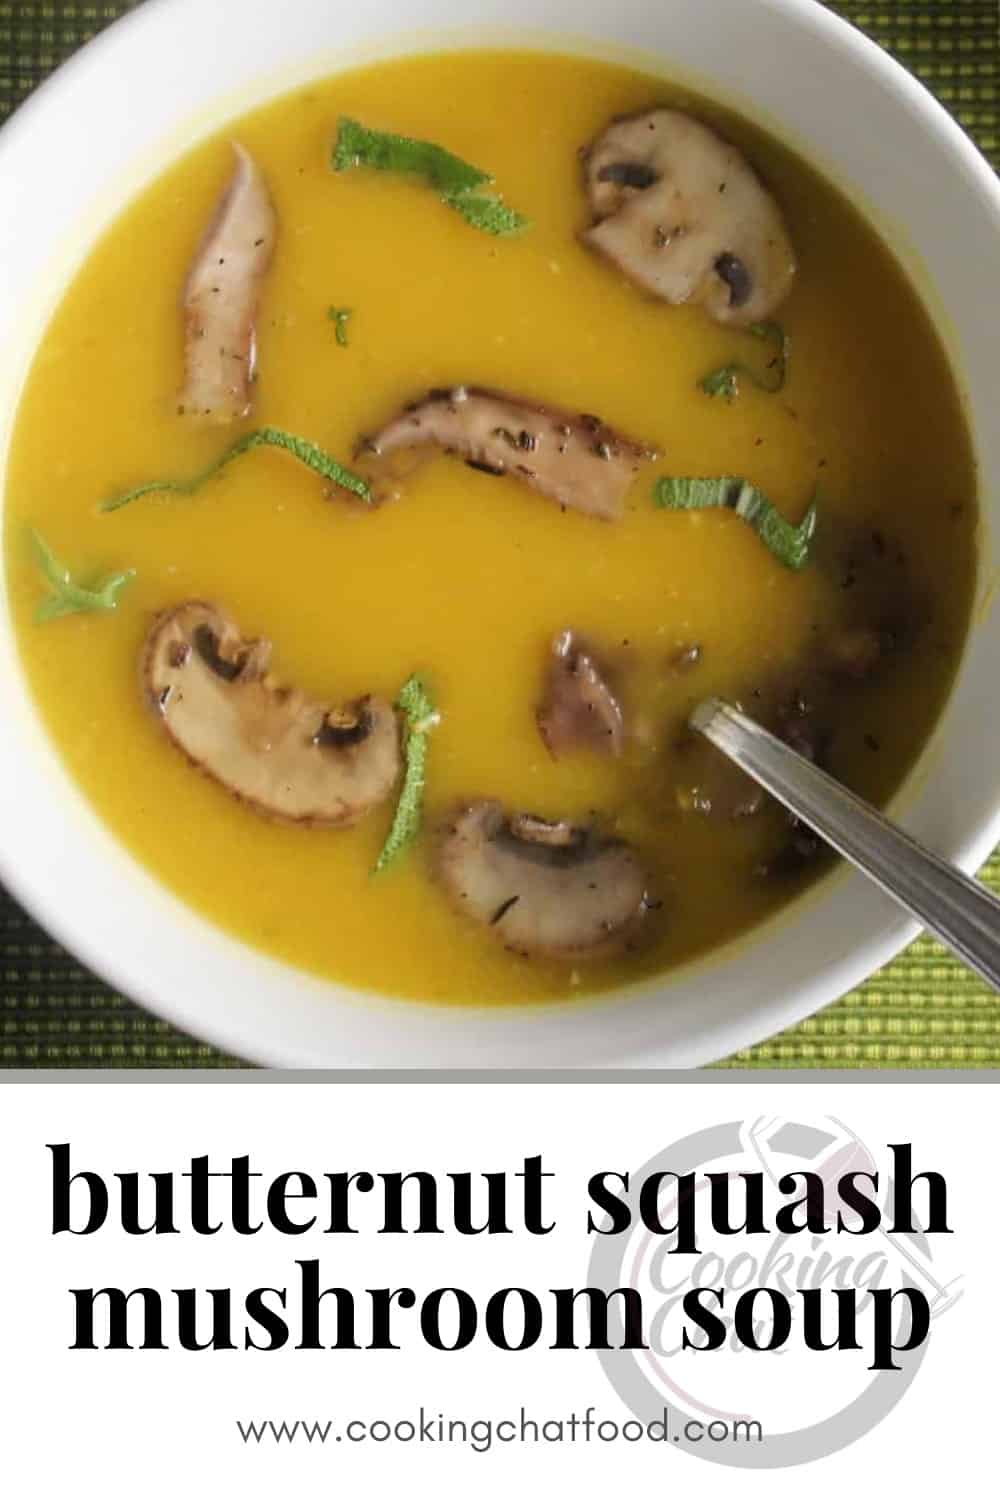 bowl of butternut squash soup with mushrooms, served in a white bowl. text underneath describing the soup.